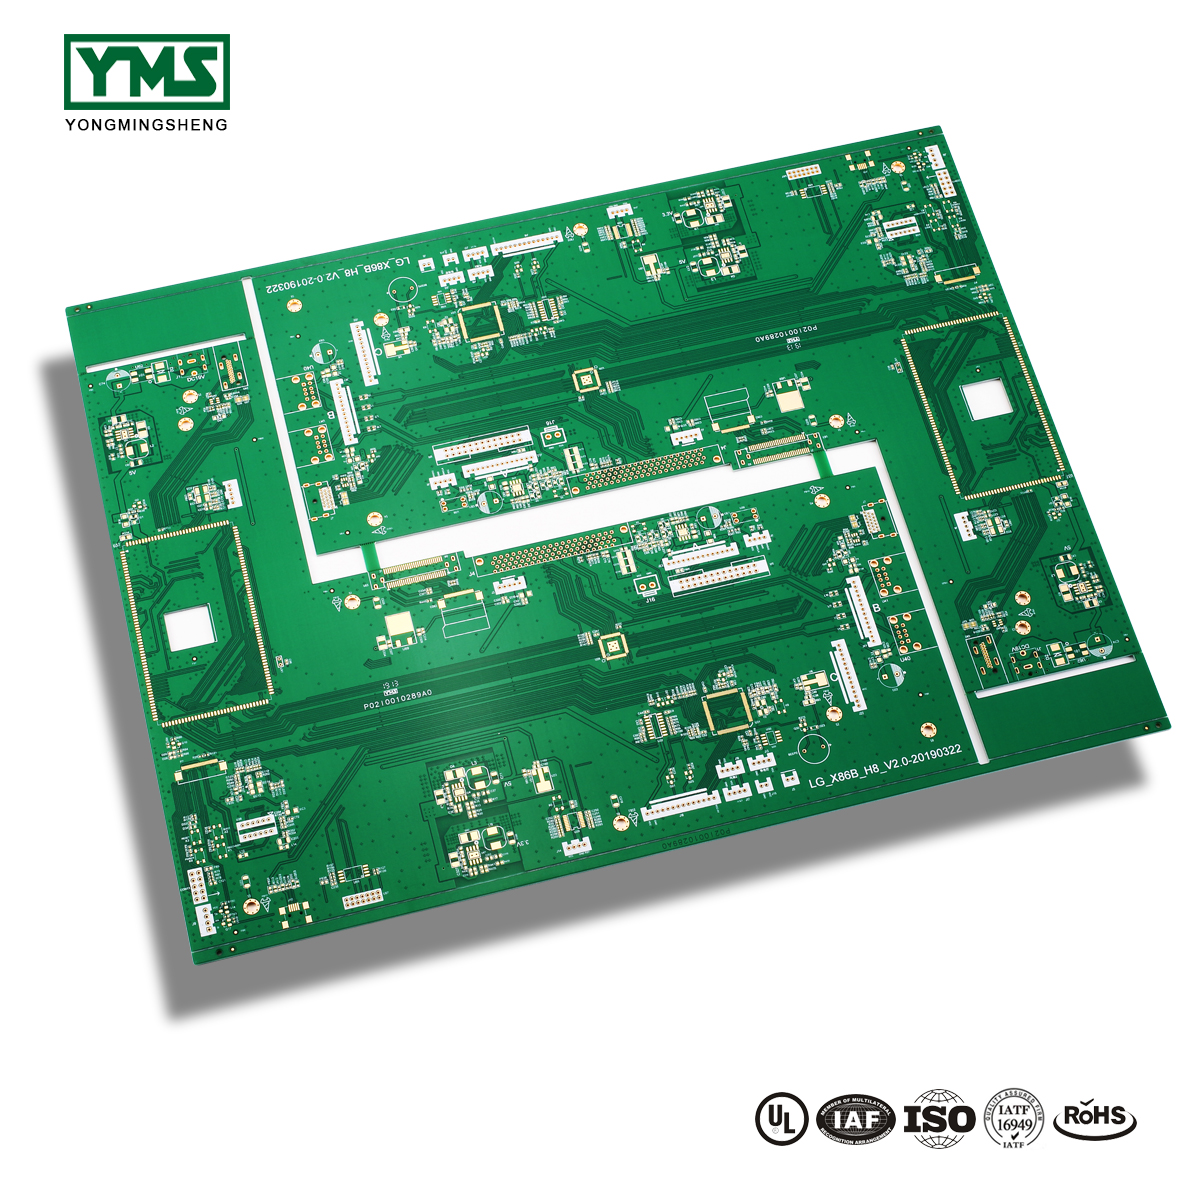 China Supplier Impedance Control Pcb - Wholesale OEM Iso Certificated Electronic Assembly Assembled Printed Circuit Board (pcb) With Electronic Components – Yongmingsheng